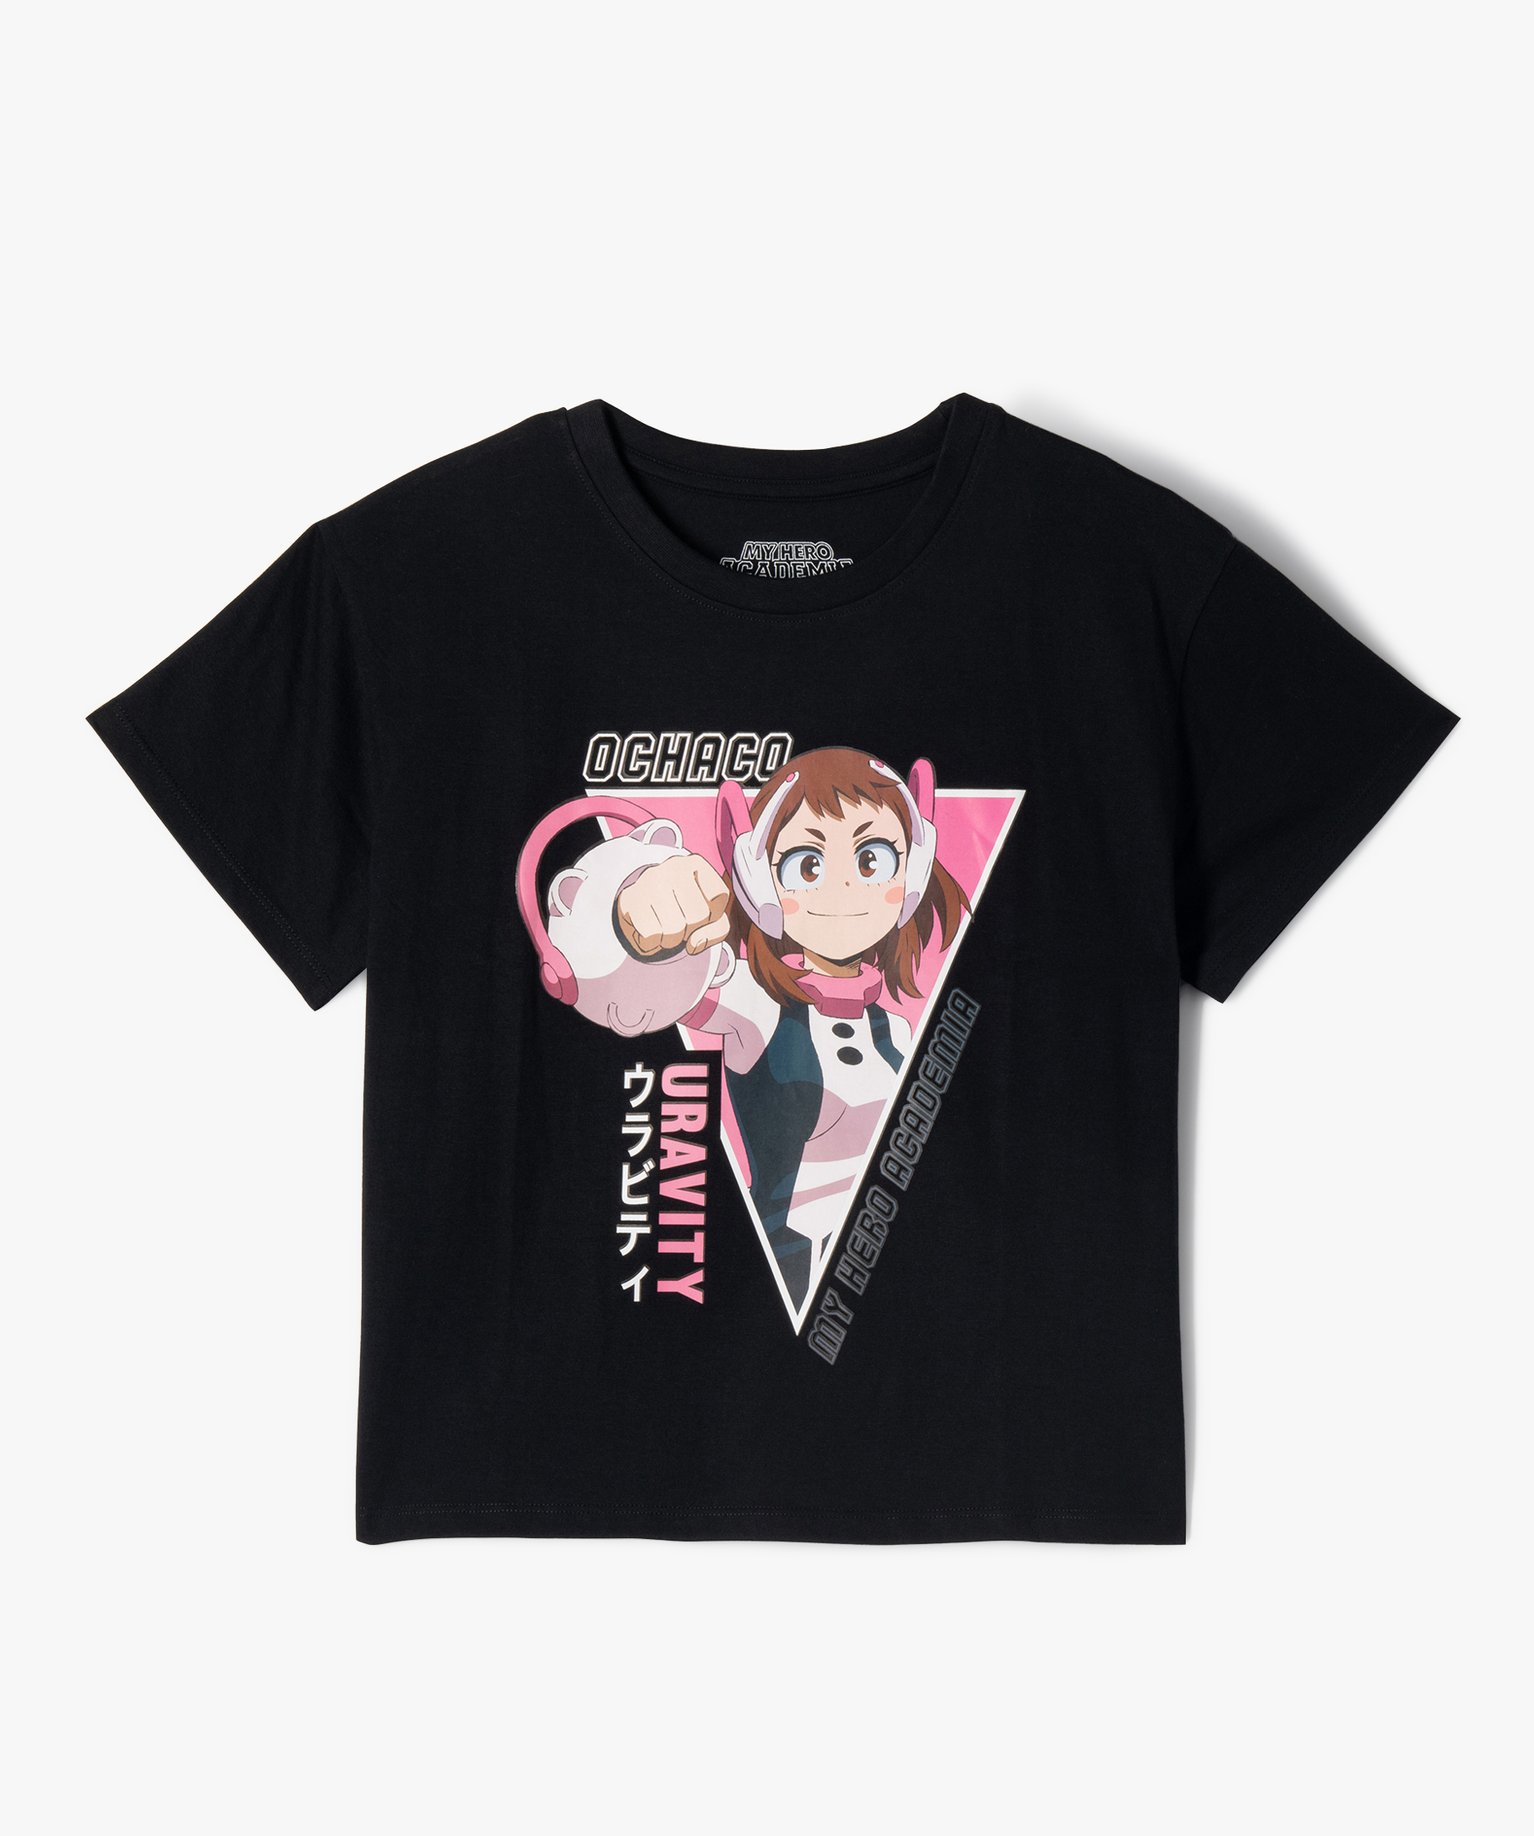 Tee-shirt à manches courtes coupe ample fille - My Hero Academia - 10 - noir - MYHERO ACADEMIA